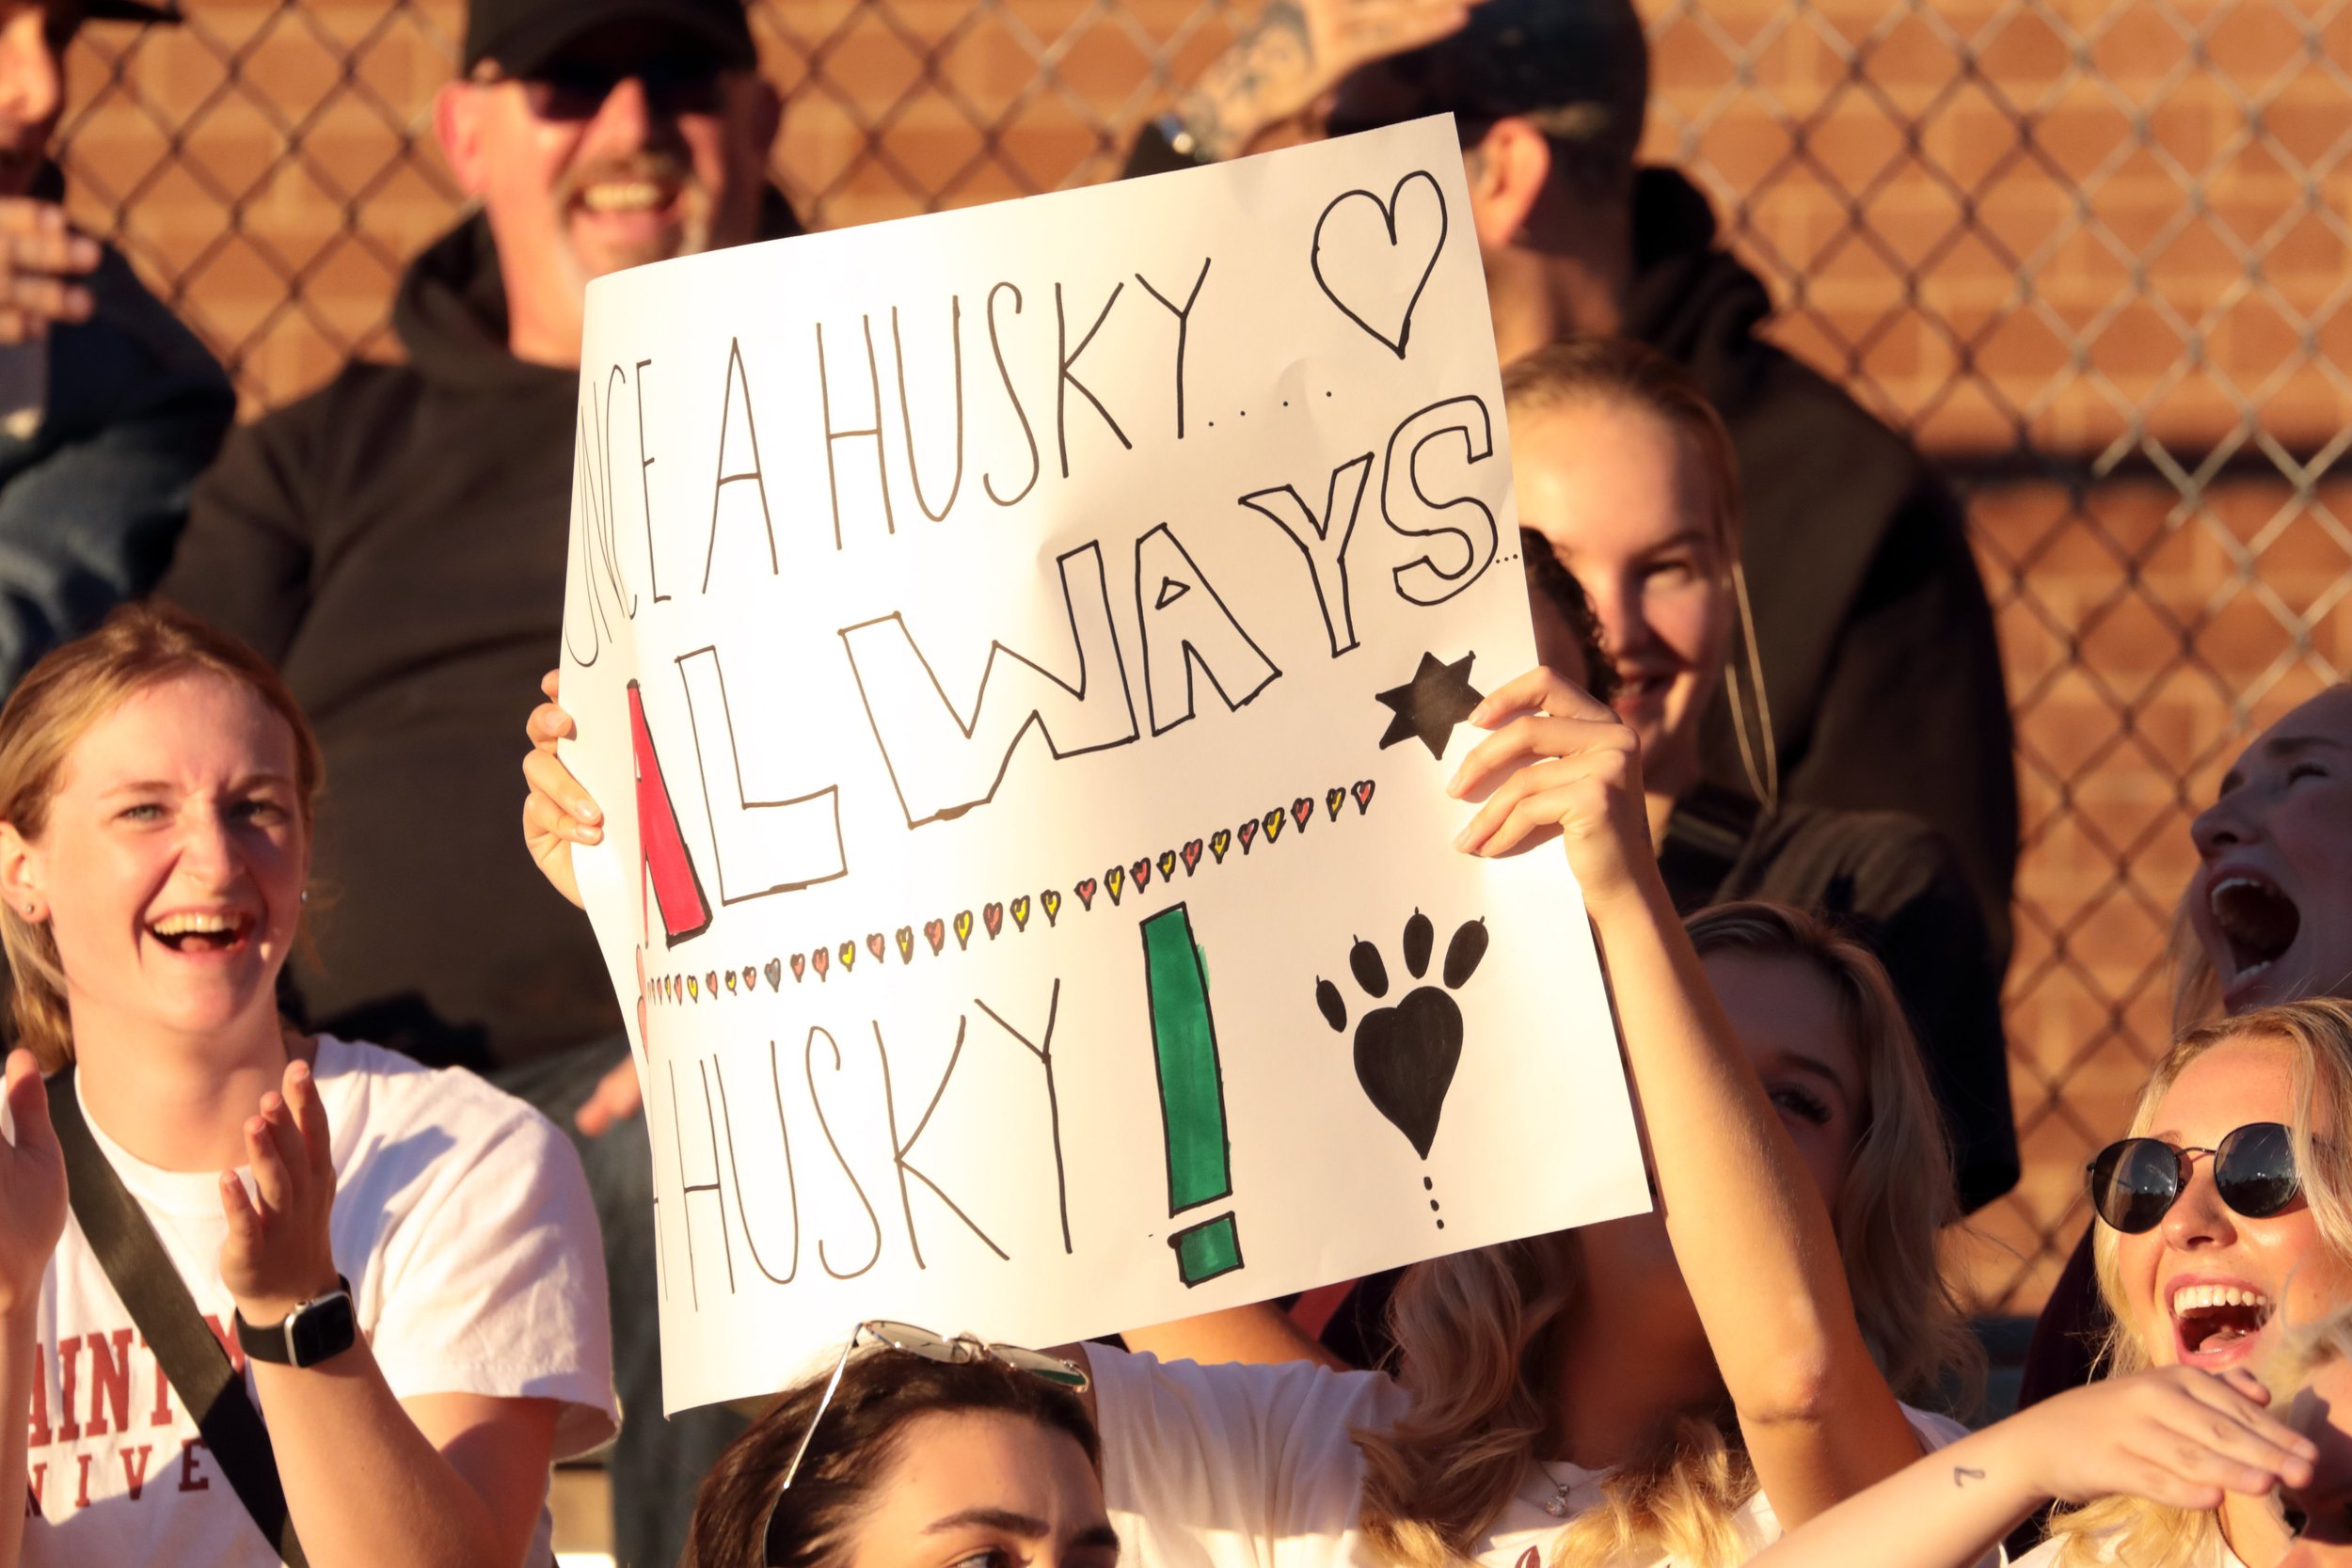 Fans in the crowd with a sign supporting the huskies